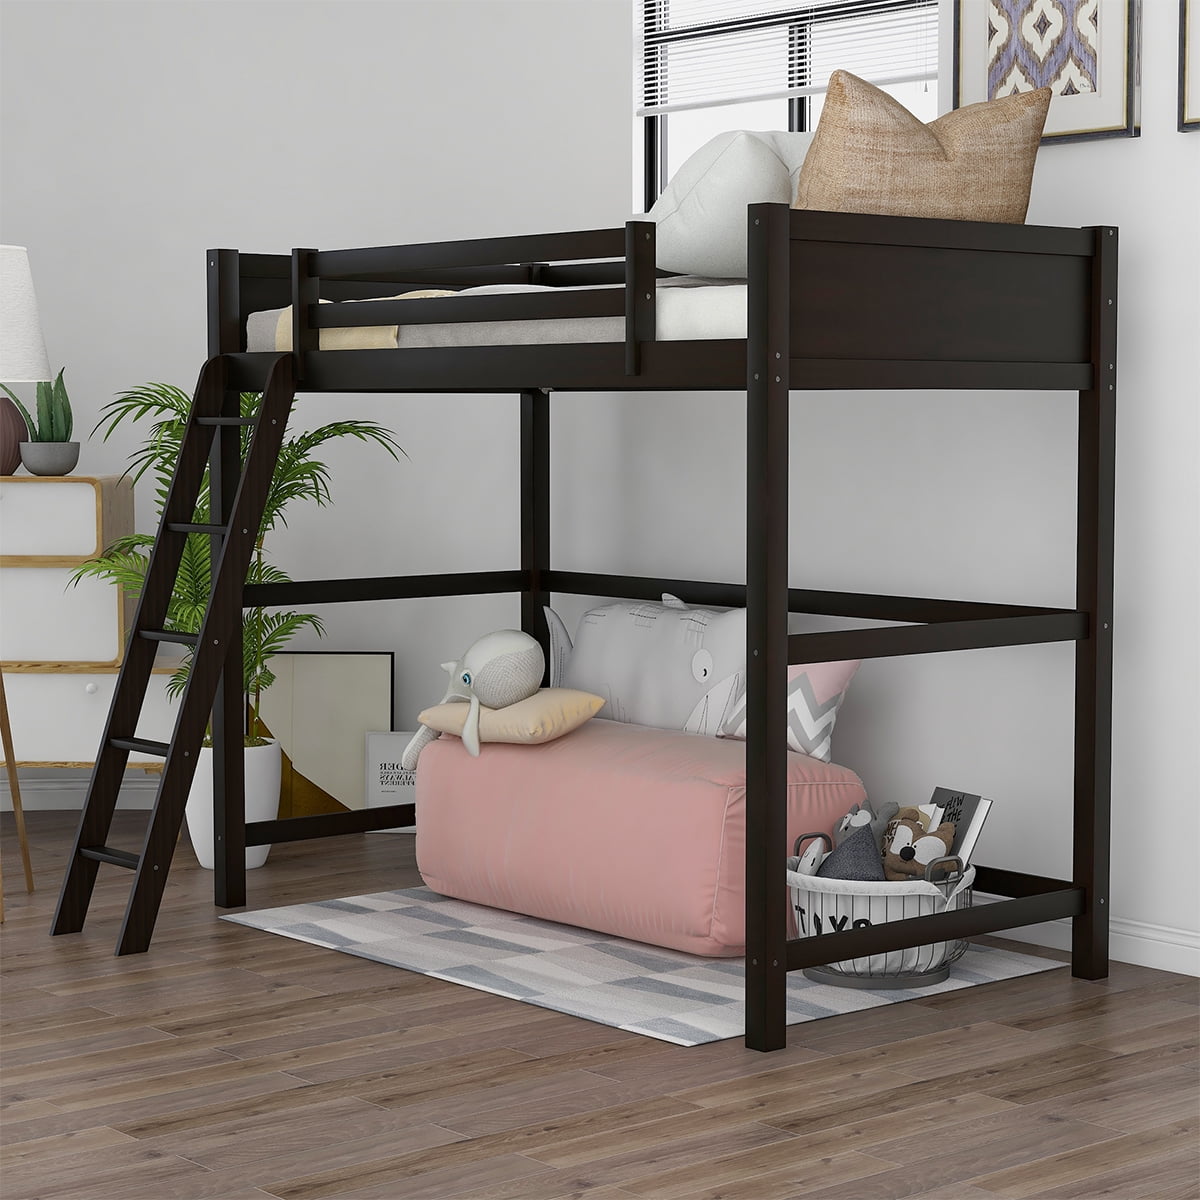 Sentern Solid Wood Twin Loft Bed With, Angled Bunk Bed Ladder Hooks